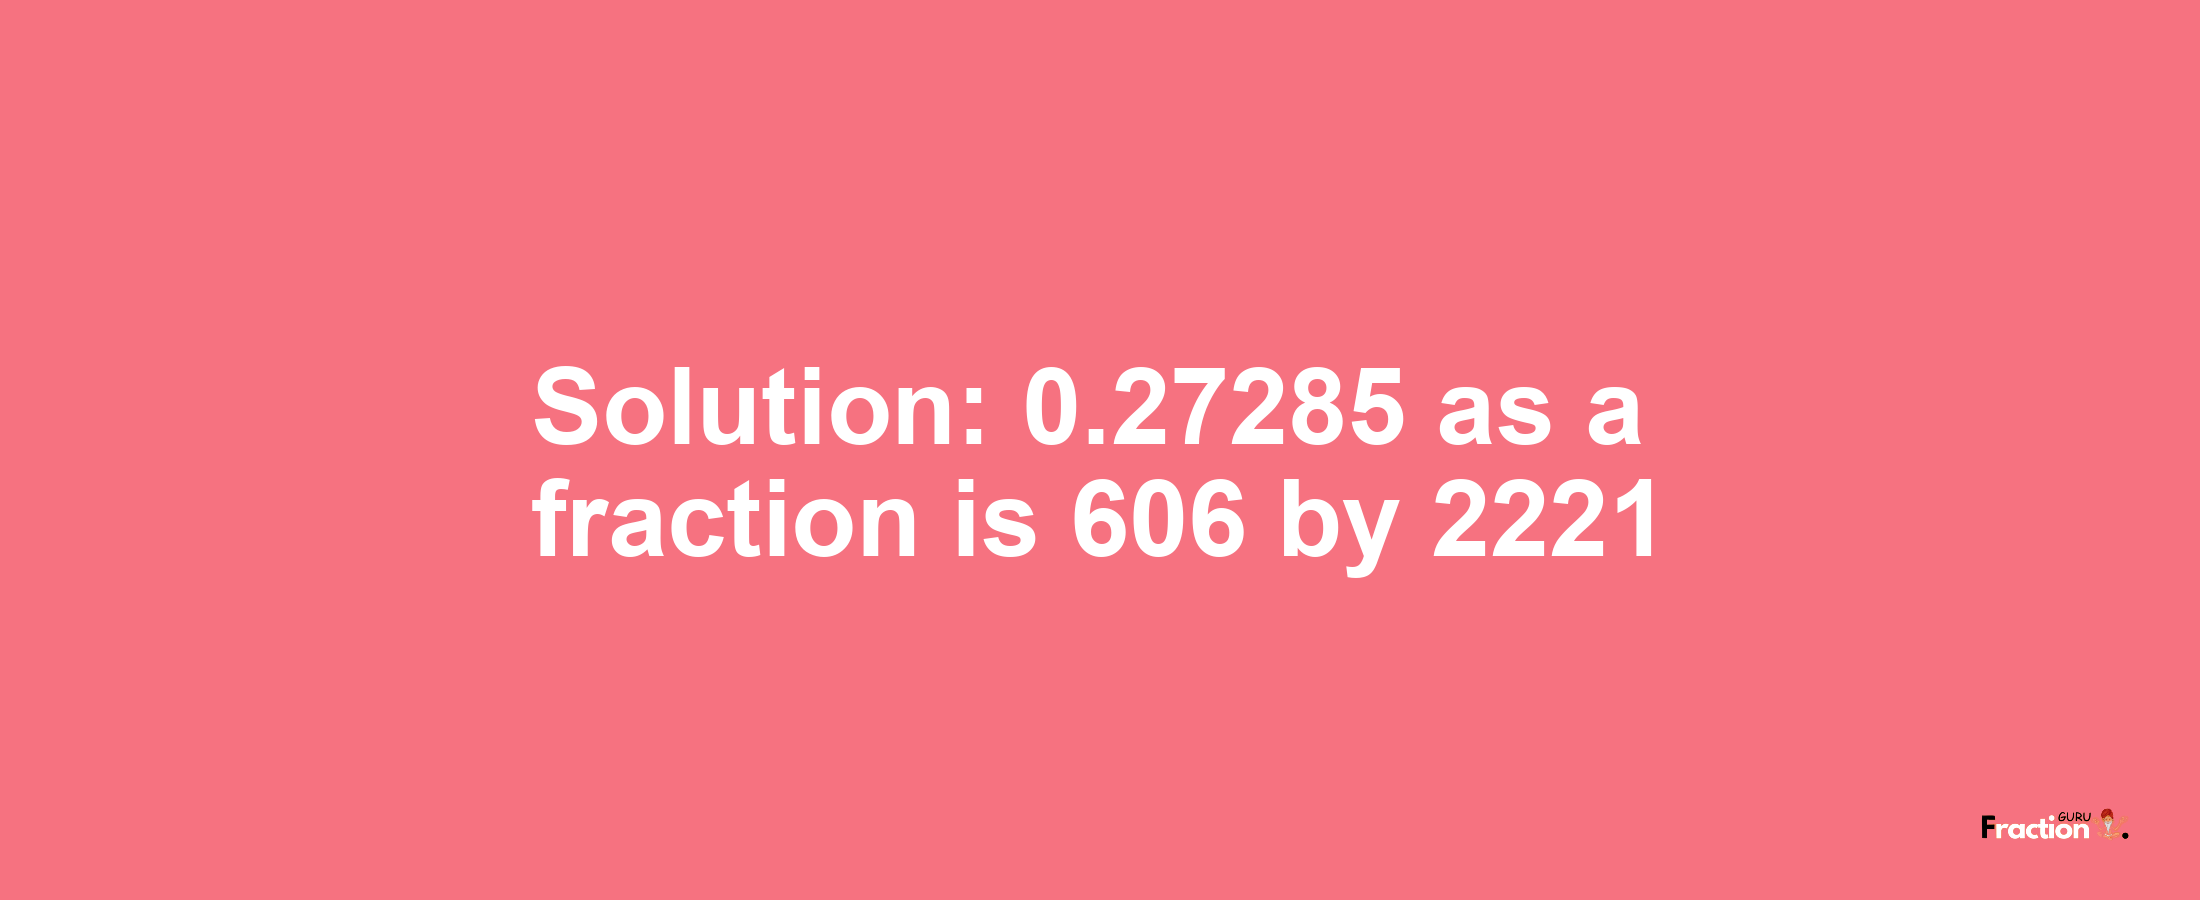 Solution:0.27285 as a fraction is 606/2221